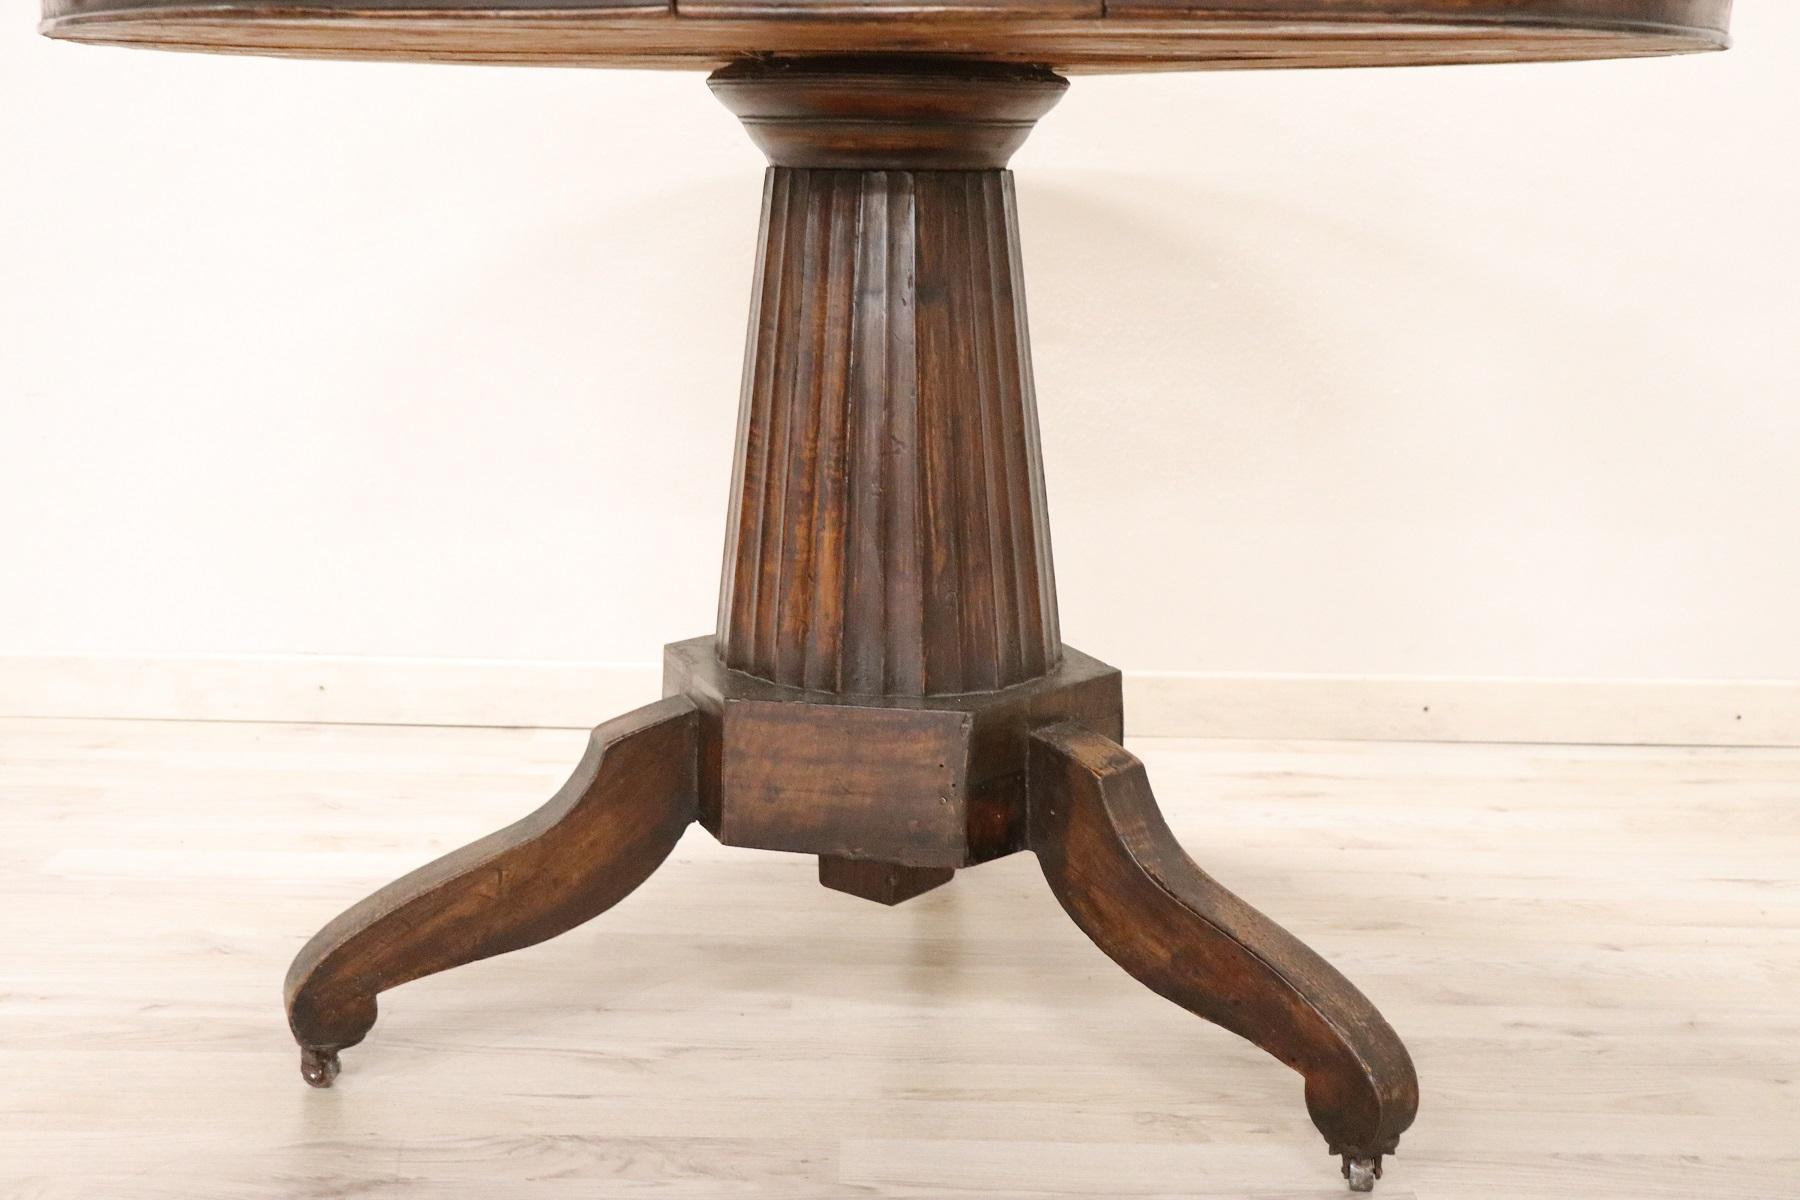 Beautiful important French Empire 1804s-1815 19th century in solid walnut. Table with elegant turned central leg made from a single wooden block and delicate feet. Particular and practical drawer. The feet end with small brass wheels that were often